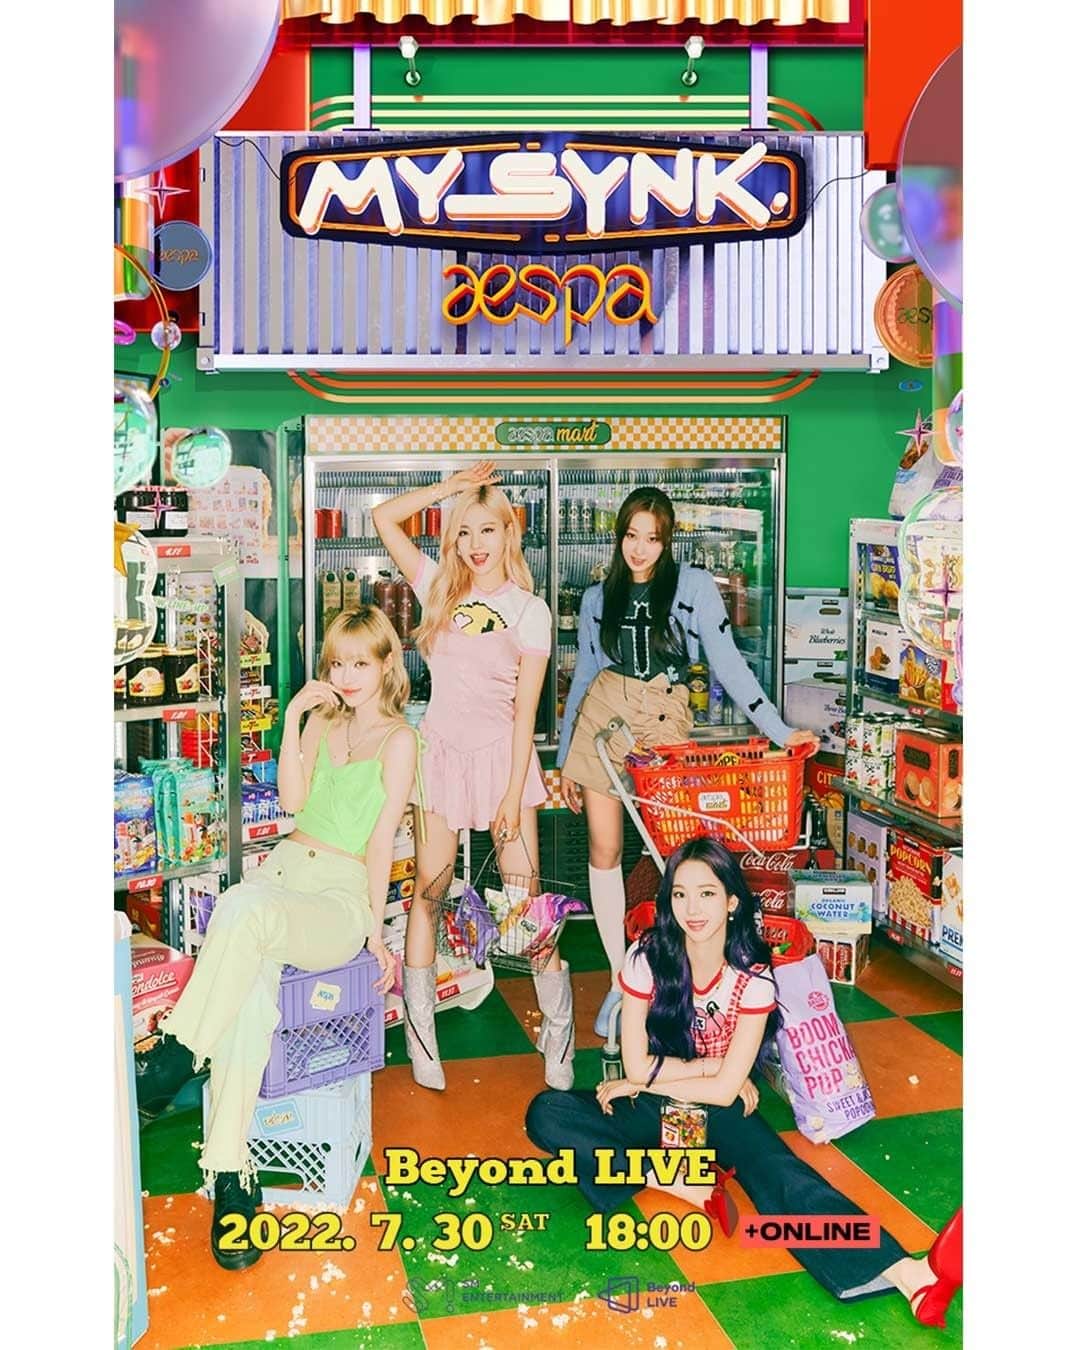 aespaさんのインスタグラム写真 - (aespaInstagram)「Beyond LIVE - 2022 aespa FAN MEETING “MY SYNK. aespa”   📆 07/30 SAT 6PM (KST) 👉 Sales – KOREA : \39,000 / JAPAN : ¥3,900 / GLOBAL : 35 USD ※ You can purchase one ticket per ID   ✅ Beyond LIVE 🔗 https://bit.ly/3uBGSNW   🎫 Single Ticket Sales Open - 판매 기간: 2022년 7월 12일 (화) 15:00 ~ 2022년 7월 30일 (토) 19:00 (KST) - Sales Period: From July 12, 2022 (Tue) 15:00 to July 30, 2022 (Sat) 19:00 (KST)   ✅ SMTOWN &STORE -PC KO: https://bit.ly/3It3JRu  EN: https://bit.ly/3IwG034  JP: https://bit.ly/3IqaG5X  CN: https://bit.ly/3yVXlPD    -MO KO: https://bit.ly/3c71jfq  EN: https://bit.ly/3ACaWNn  JP: https://bit.ly/3yWuiLZ  CN: https://bit.ly/3as6SEL    🎫 Single Ticket Sales Open - 판매 기간: 2022년 7월 12일 (화) 15:00 ~ 2022년 7월 30일 (토) 18:00 (KST) - Sales Period: From July 12, 2022 (Tue) 15:00 to July 30, 2022 (Sat) 18:00 (KST)   #aespa #aespa_Fanmeeting #에스파 #에스파_팬미팅 #my_synk_aespa #마이싱크에스파 #BeyondLIVE #Beyond_LIVE #비욘드라이브 #Beyond_LIVE_aespa_my_synk_aespa」7月12日 15時00分 - aespa_official